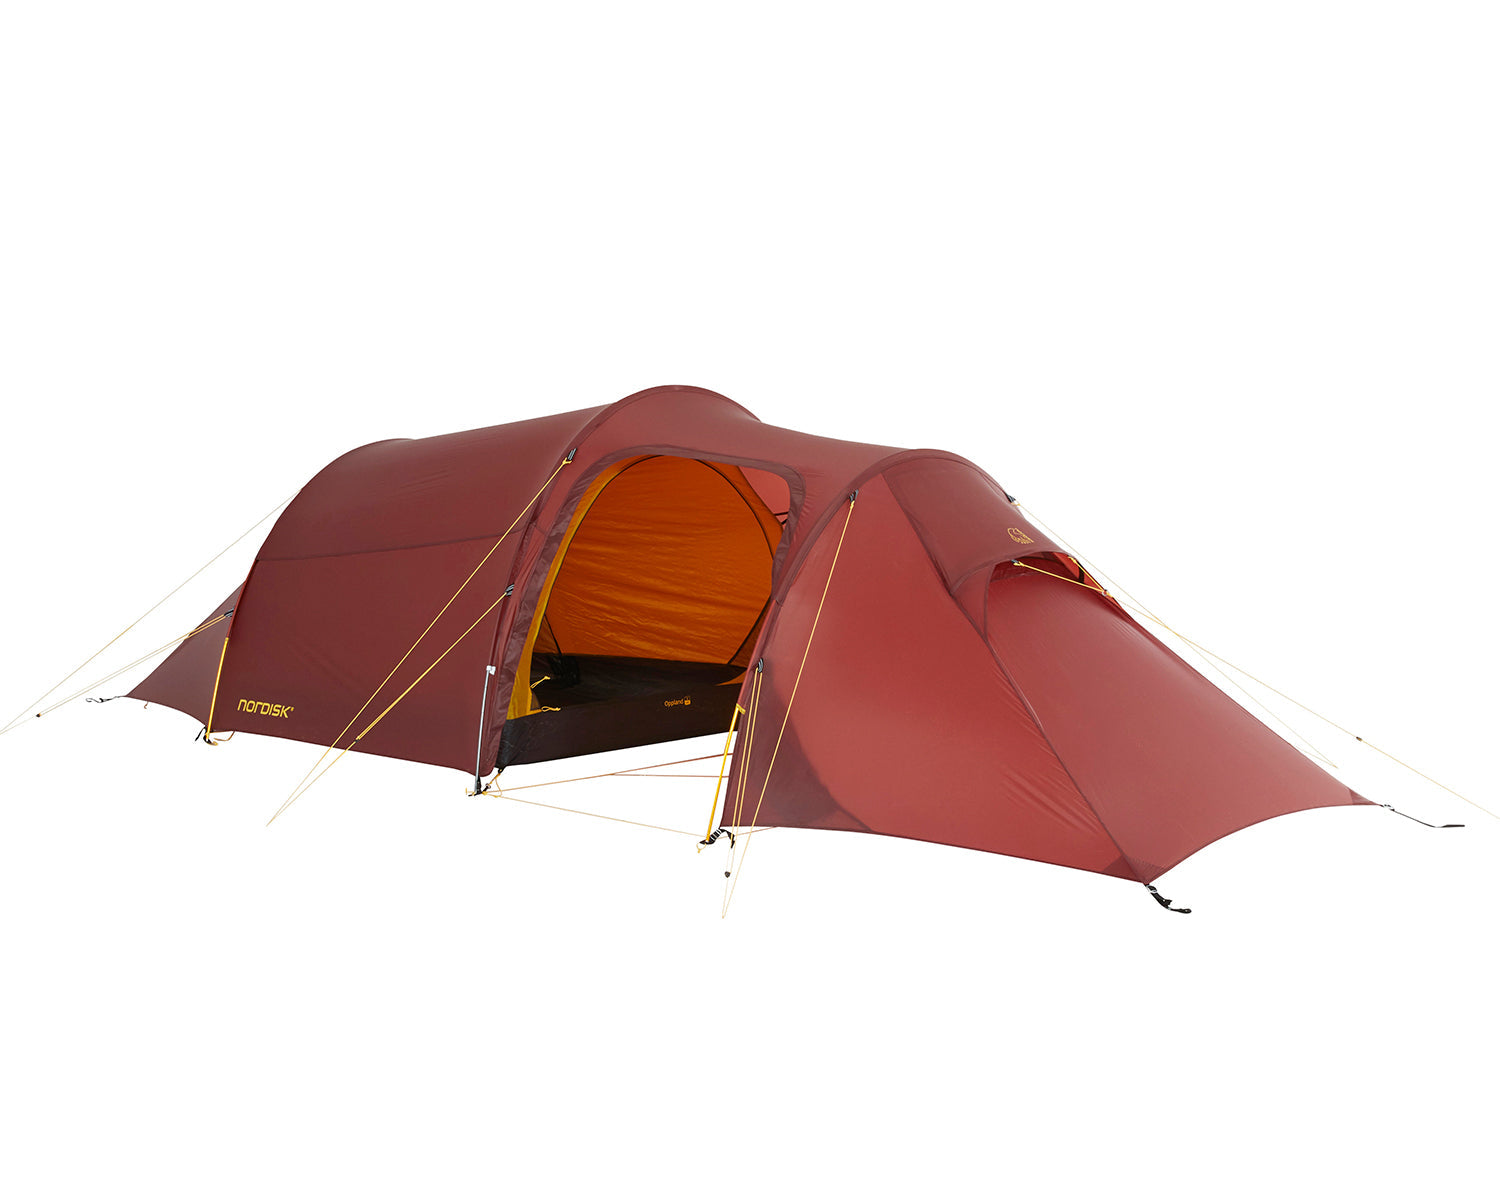 Oppland 2 LW telt - 2 person - Burnt Red